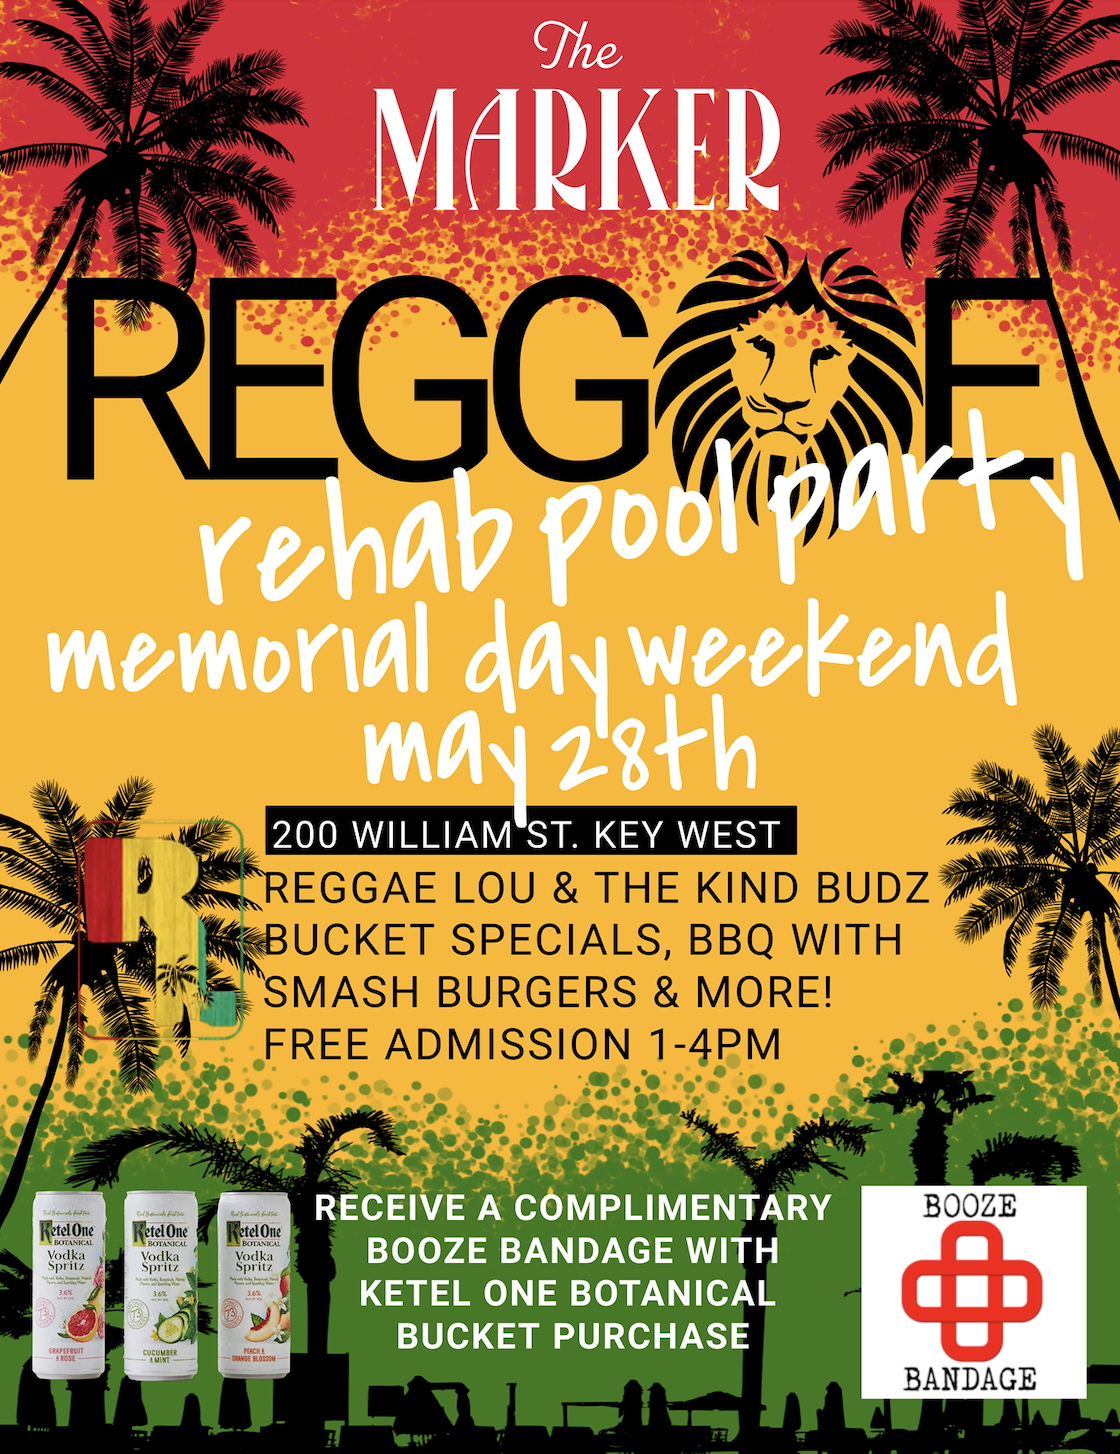 Reggae Rehab Memorial Day Pool Party at The Marker